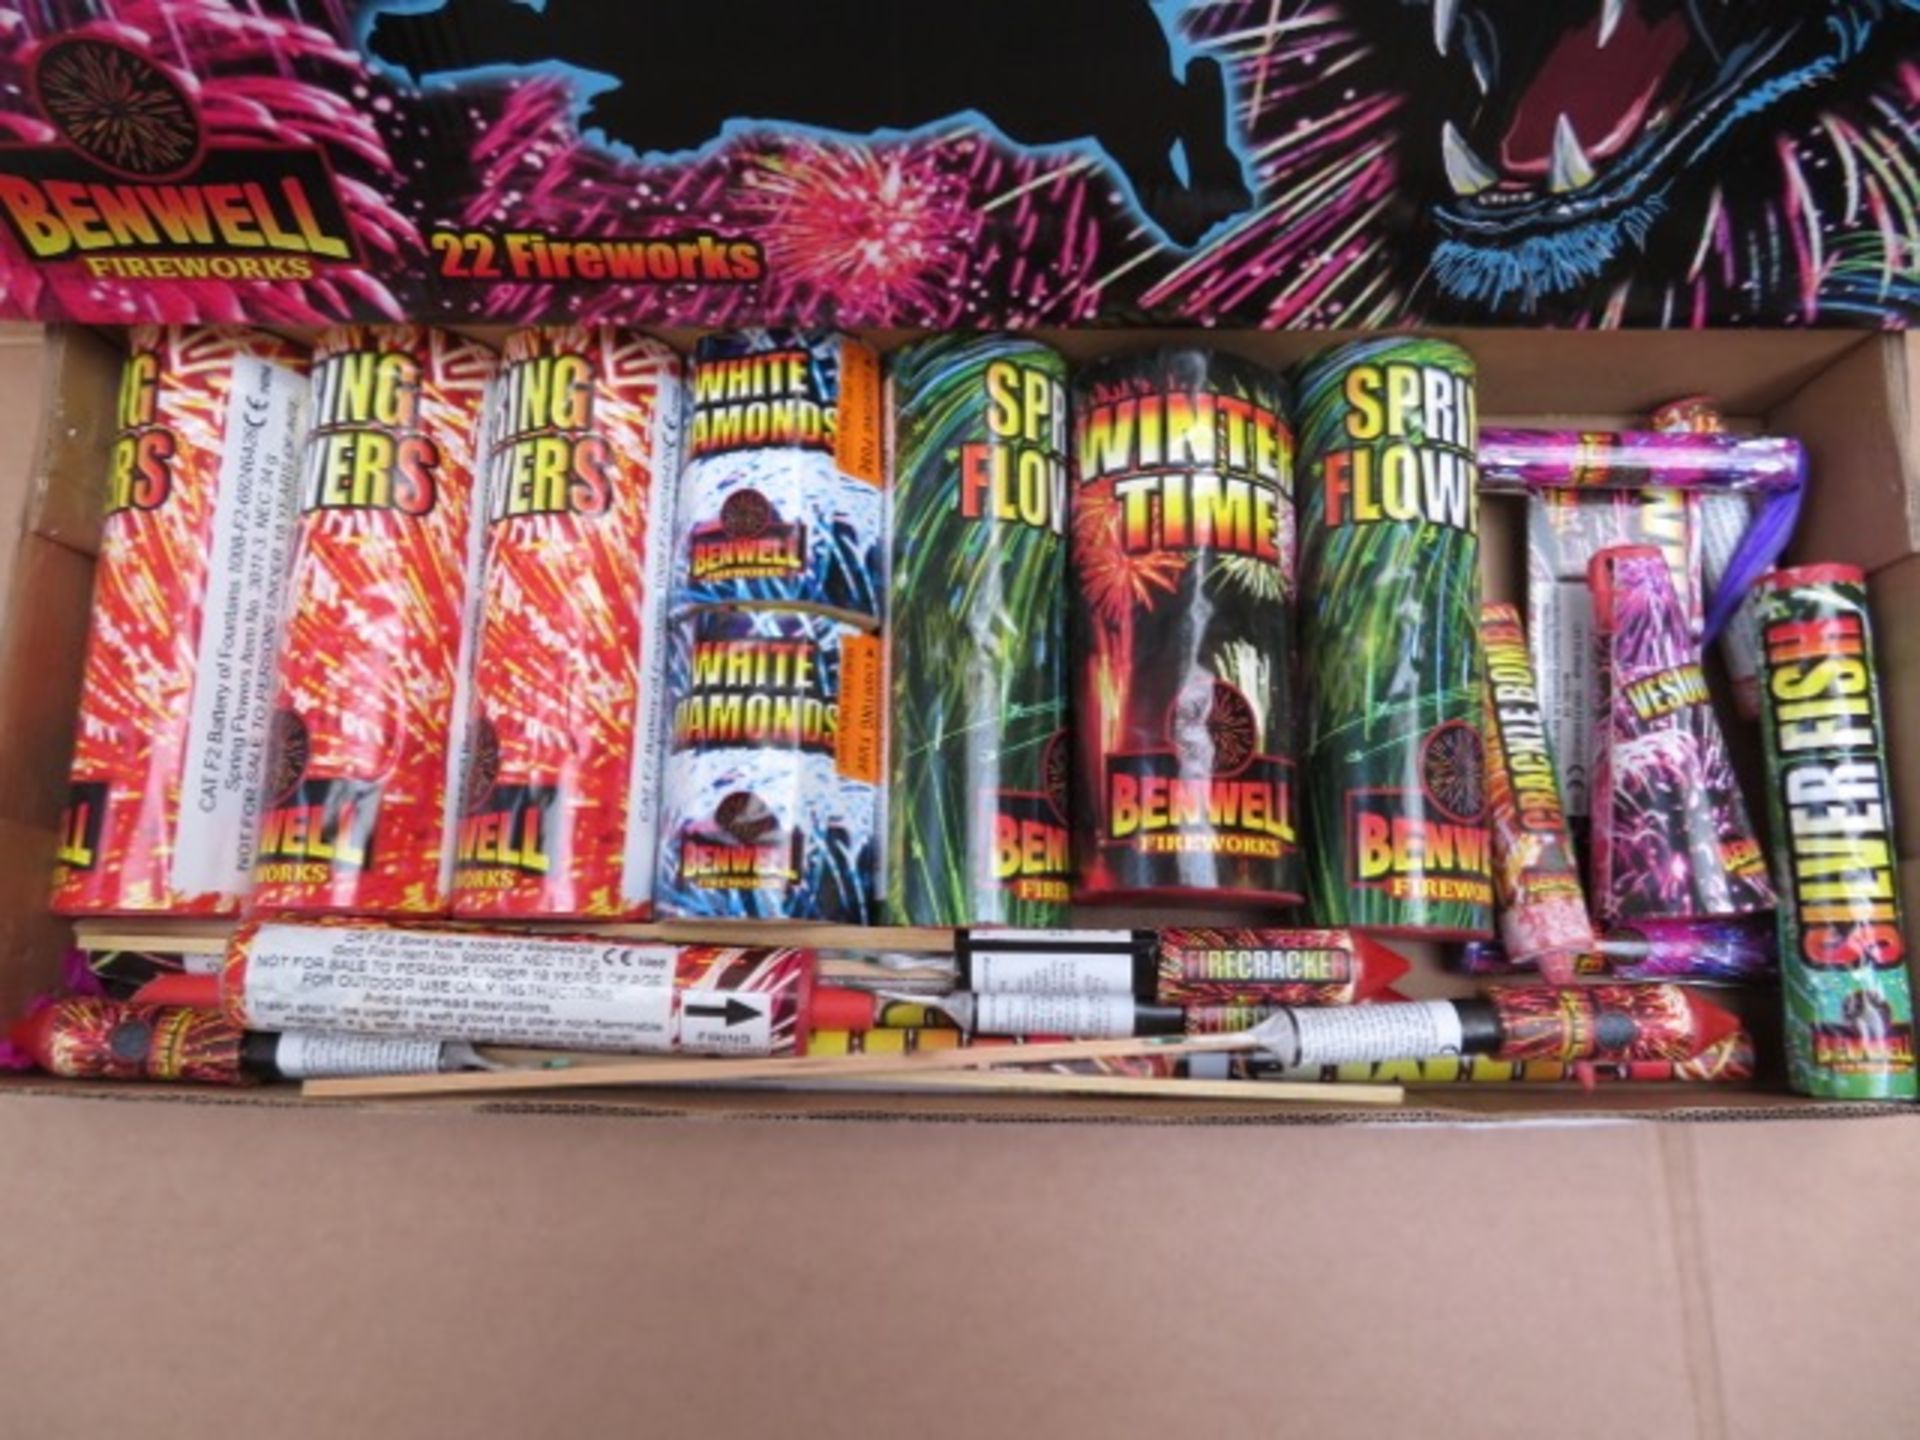 1 x Panther 22 Piece Selection Box. Pricemarked at £90. Huge selection of great quality fireworks to - Image 2 of 2